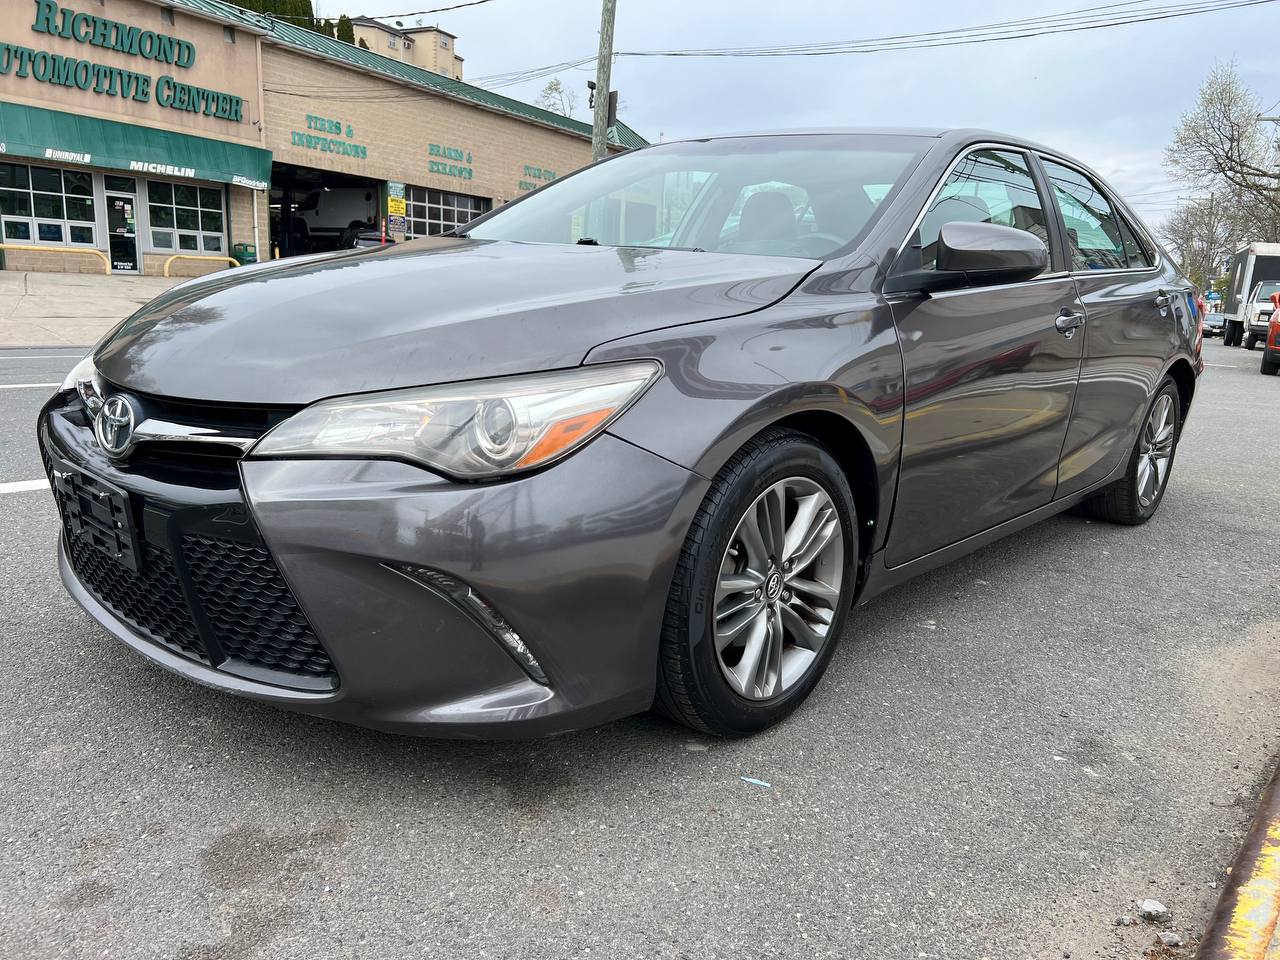 Used Car - 2017 Toyota Camry SE for Sale in Staten Island, NY